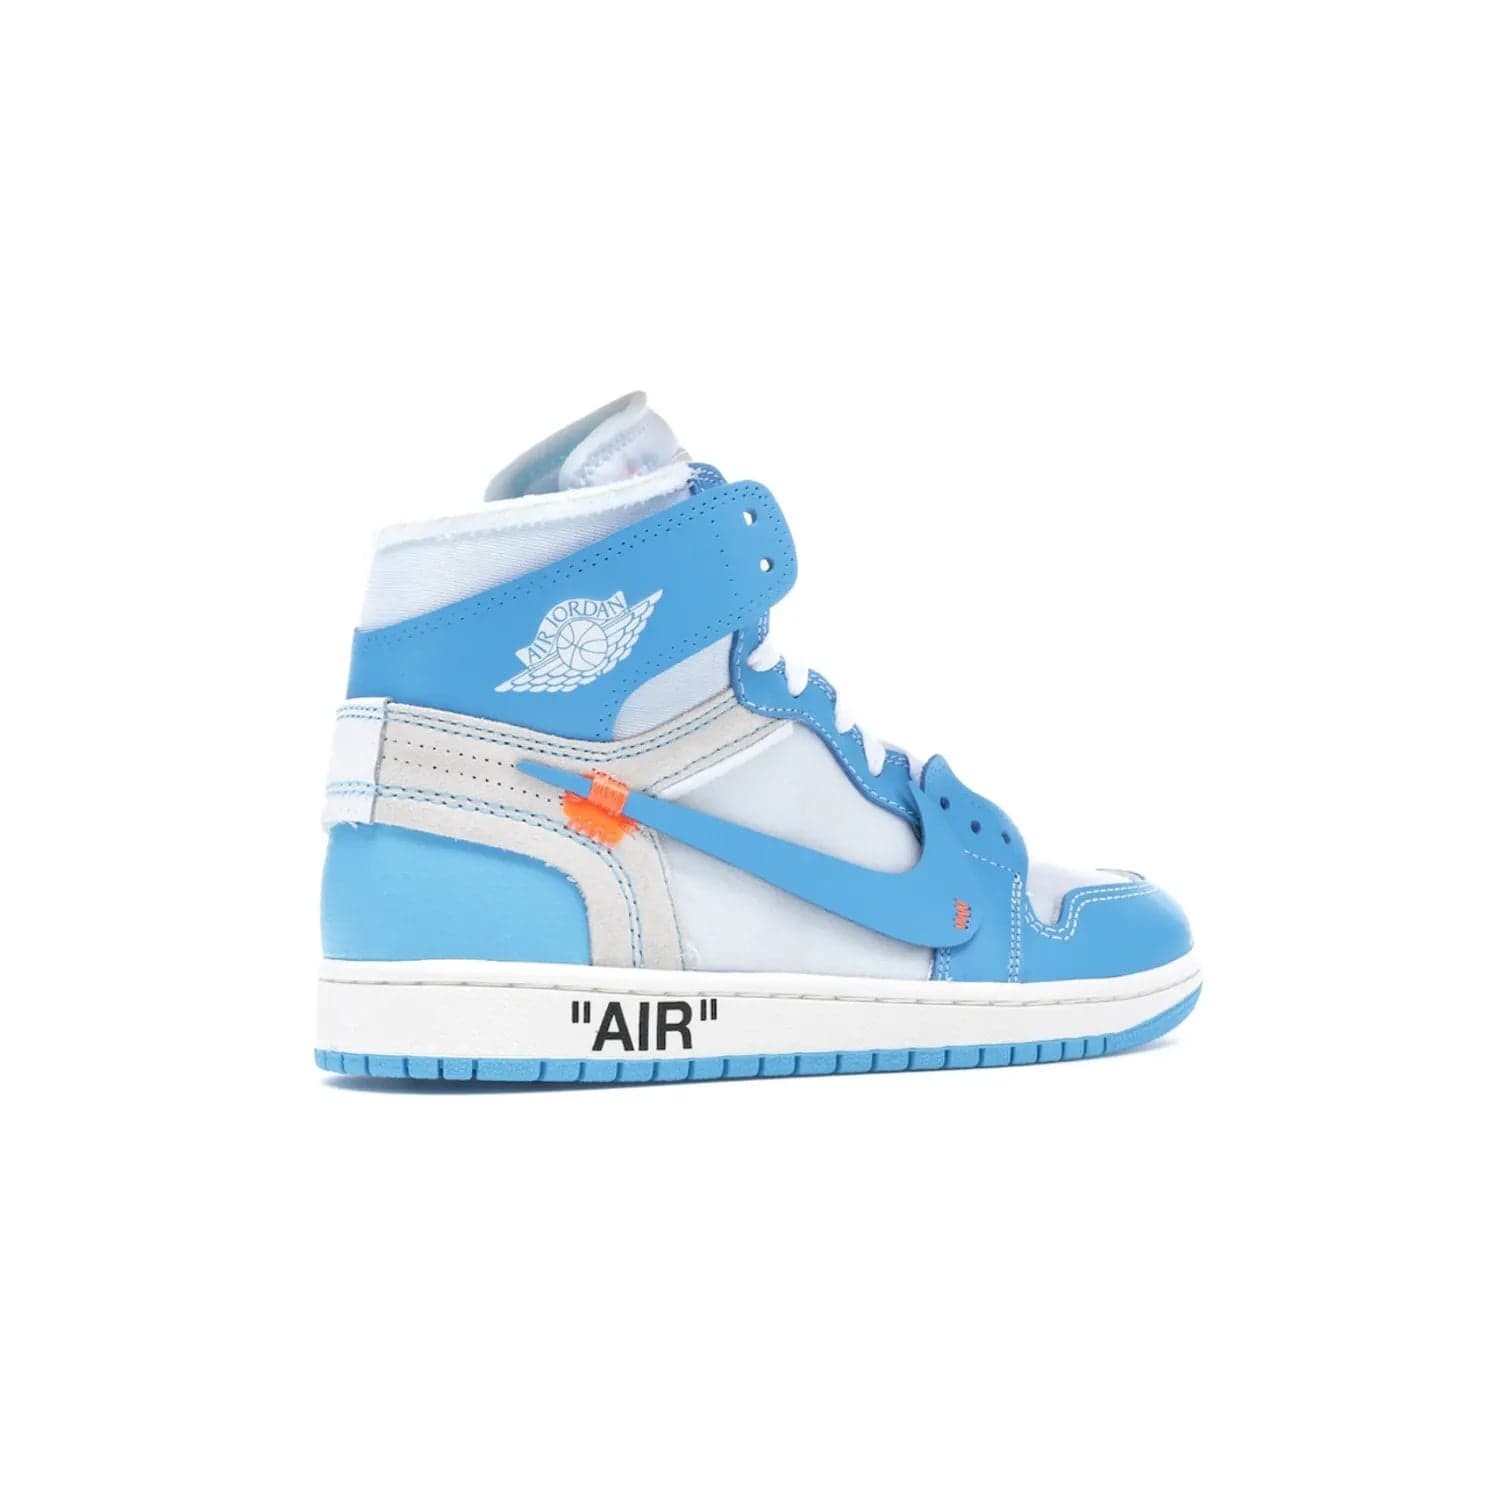 Jordan 1 Retro High Off-White University Blue - Image 34 - Only at www.BallersClubKickz.com - Classic Jordan 1 Retro High "Off-White UNC" sneakers meld style and comfort. Boasting deconstructed white and blue leather, Off-White detailing, and a white, dark powder blue and cone colorway, these sneakers are perfect for dressing up or down. Get the iconic Off-White Jordan 1's and upgrade your look.